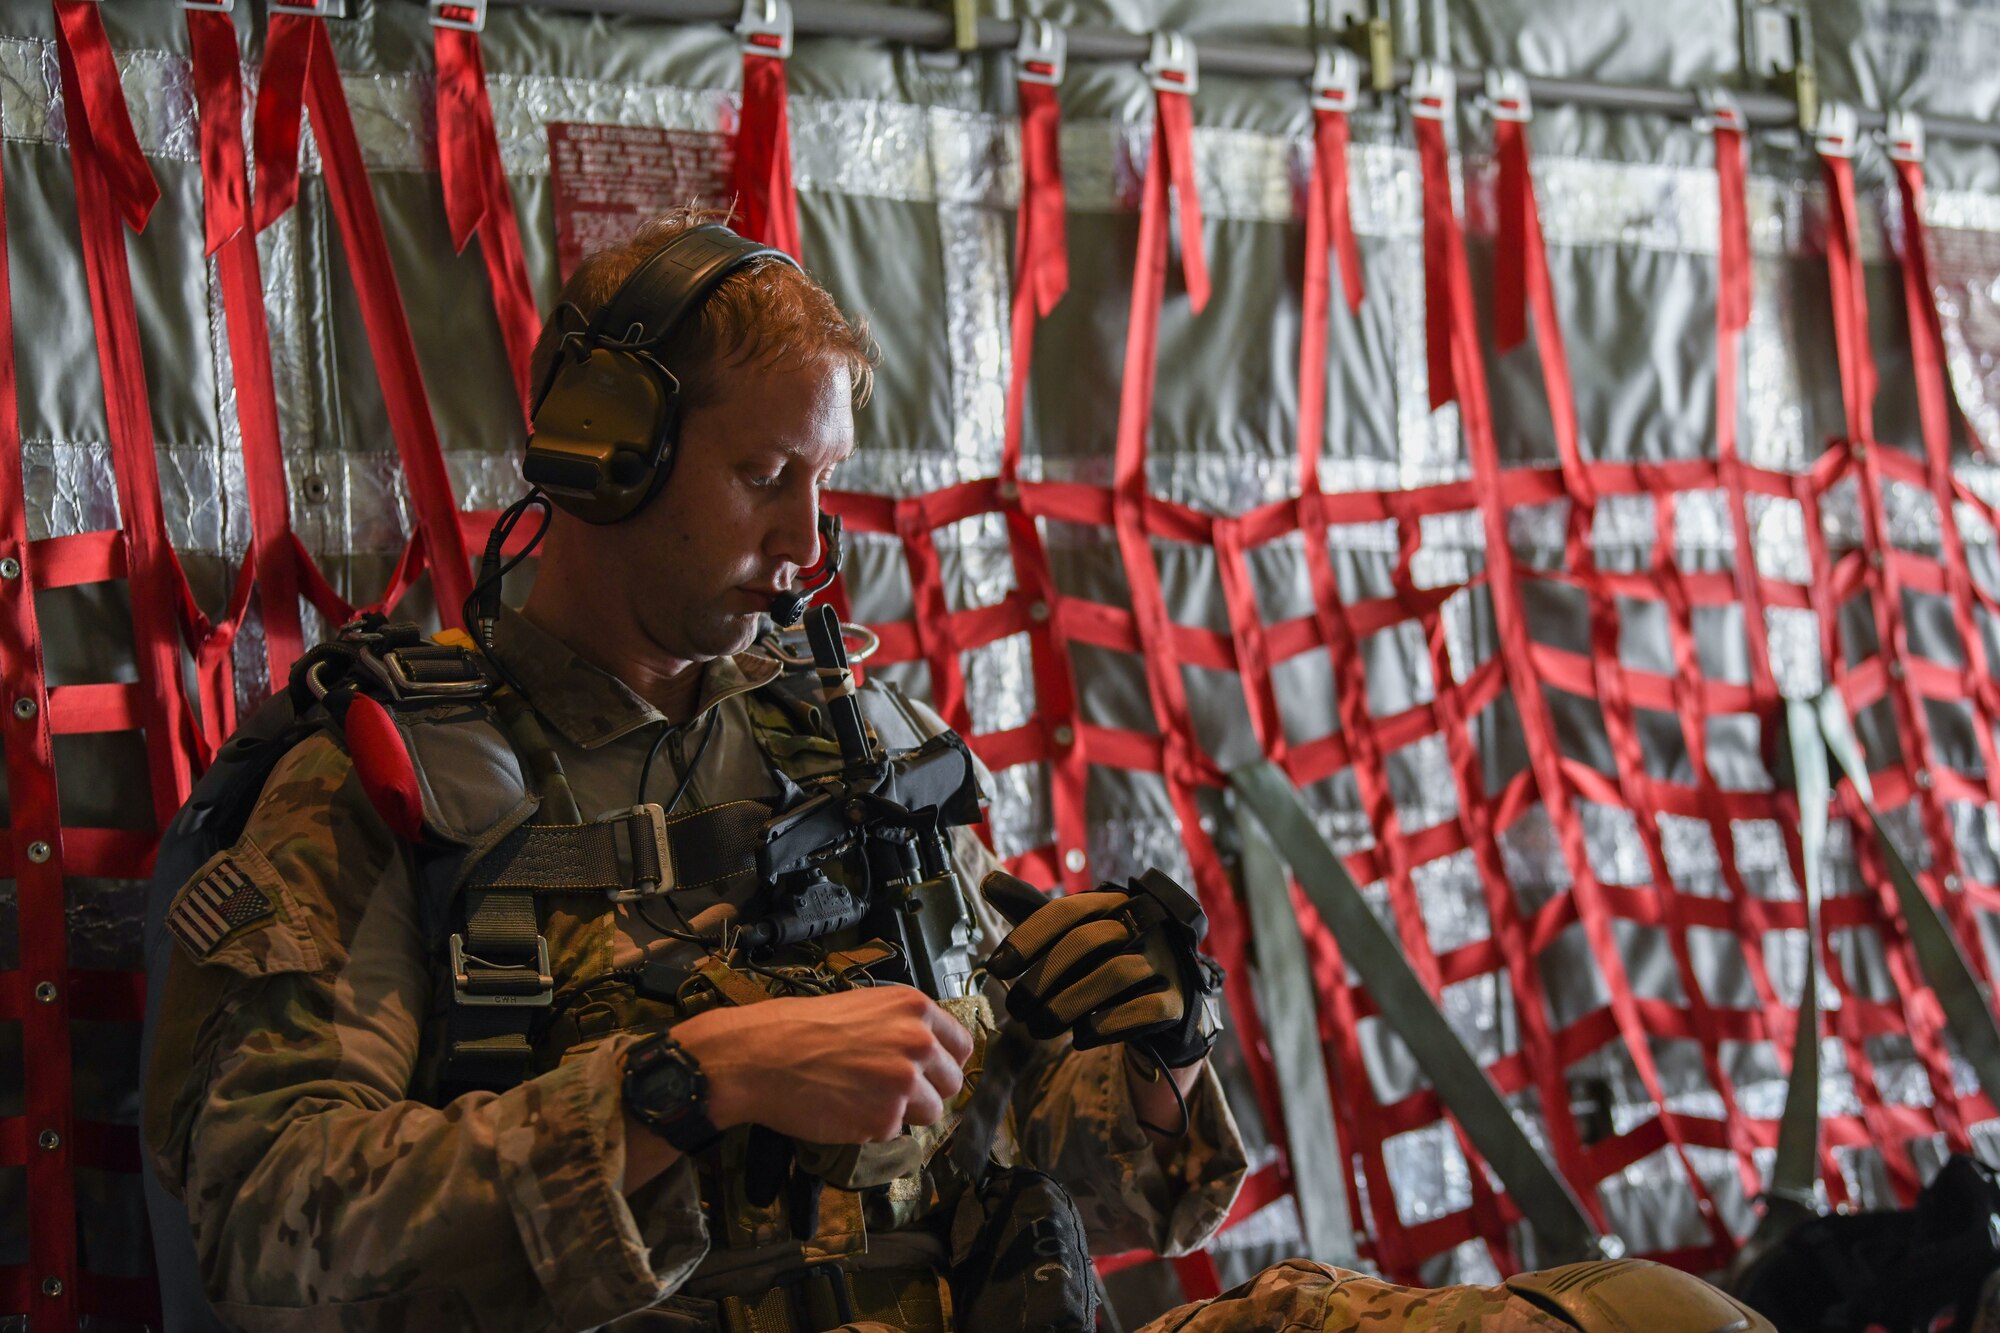 U.S. Air Force pararescueman assigned to the 82nd Expeditionary Rescue Squadron, prepares his equipment prior jump training from a U.S. Marine Corps KC-130J Super Hercules at Camp Lemonnier, Djibouti, Feb. 15, 2021. The 82nd ERQS maintains jump proficiency to provide secure, reliable, flexible combat search, rescue, and recovery capabilities in support of U.S. Africa Command in North and East Africa. They also serve as U.S. Air Forces Africa’s personnel recovery liaison, coordinating efforts between coalition and joint forces in East Africa and enhancing the combatant command’s Warfighter Recovery Network.  (U.S. Air Force photo by Senior Airman Ericka A. Woolever)